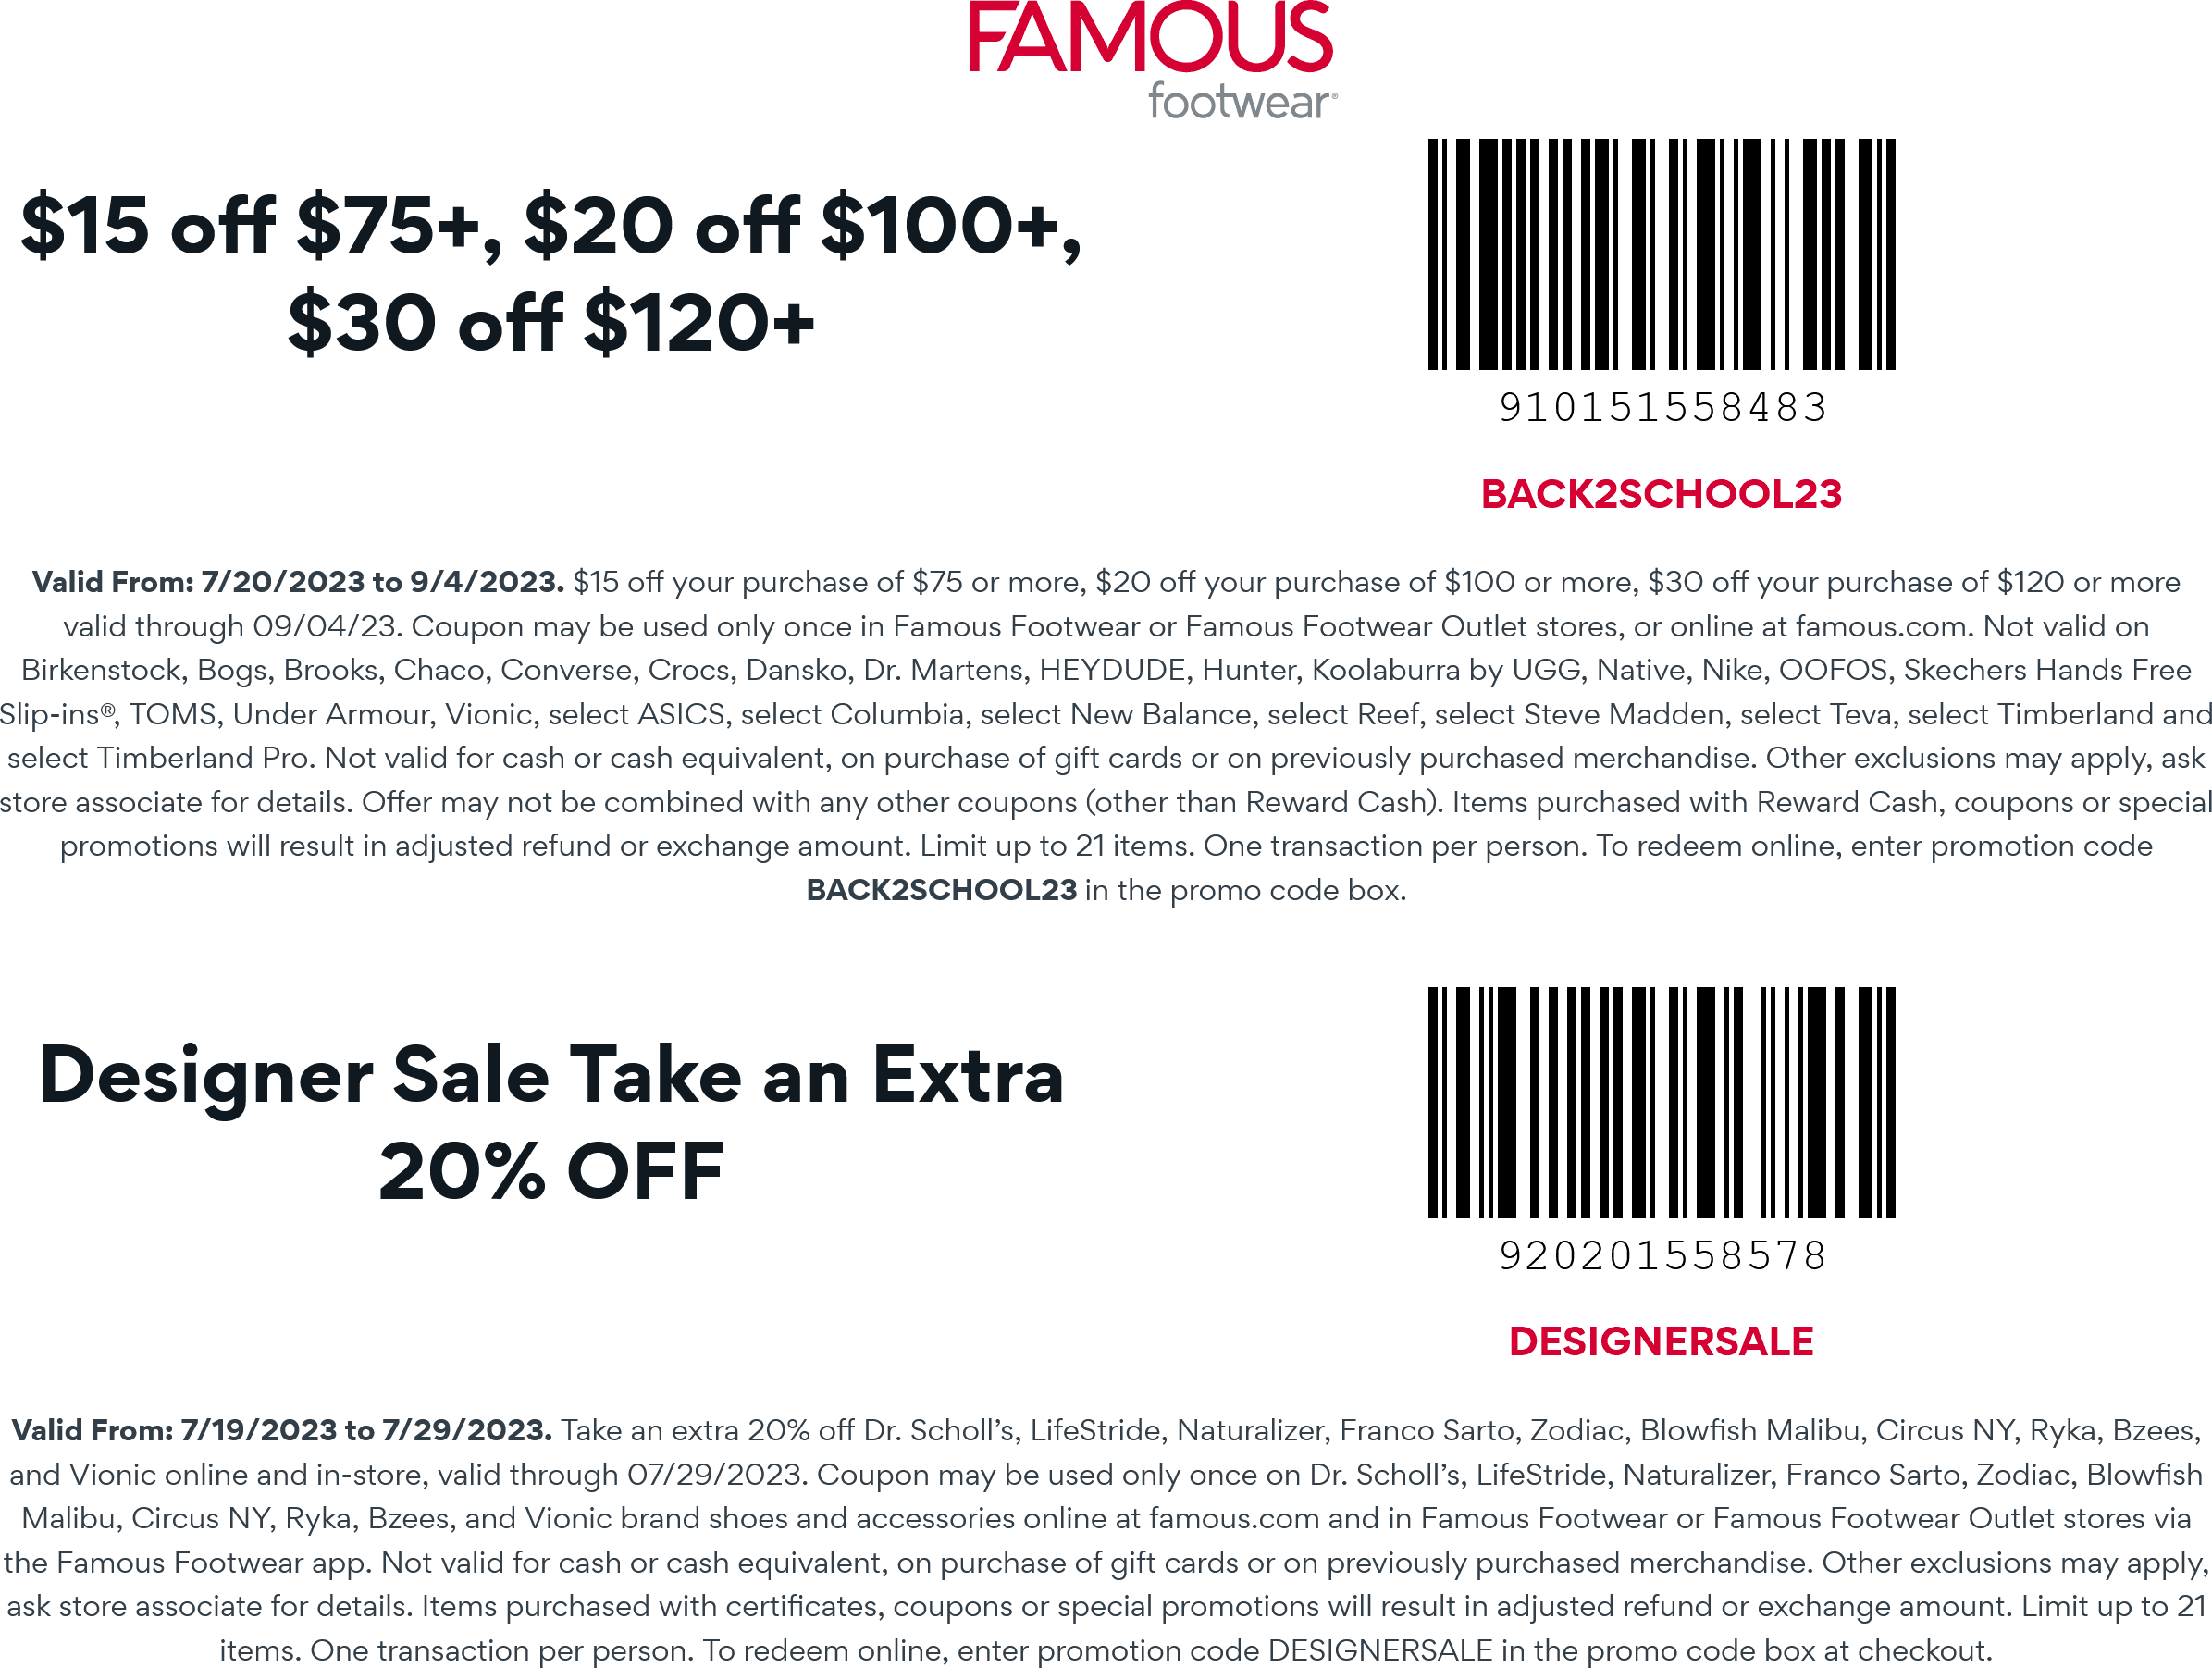 Famous Footwear stores Coupon  $15-$30 off $75+ at Famous Footwear, or online via promo code BACK2SCHOOL23 #famousfootwear 